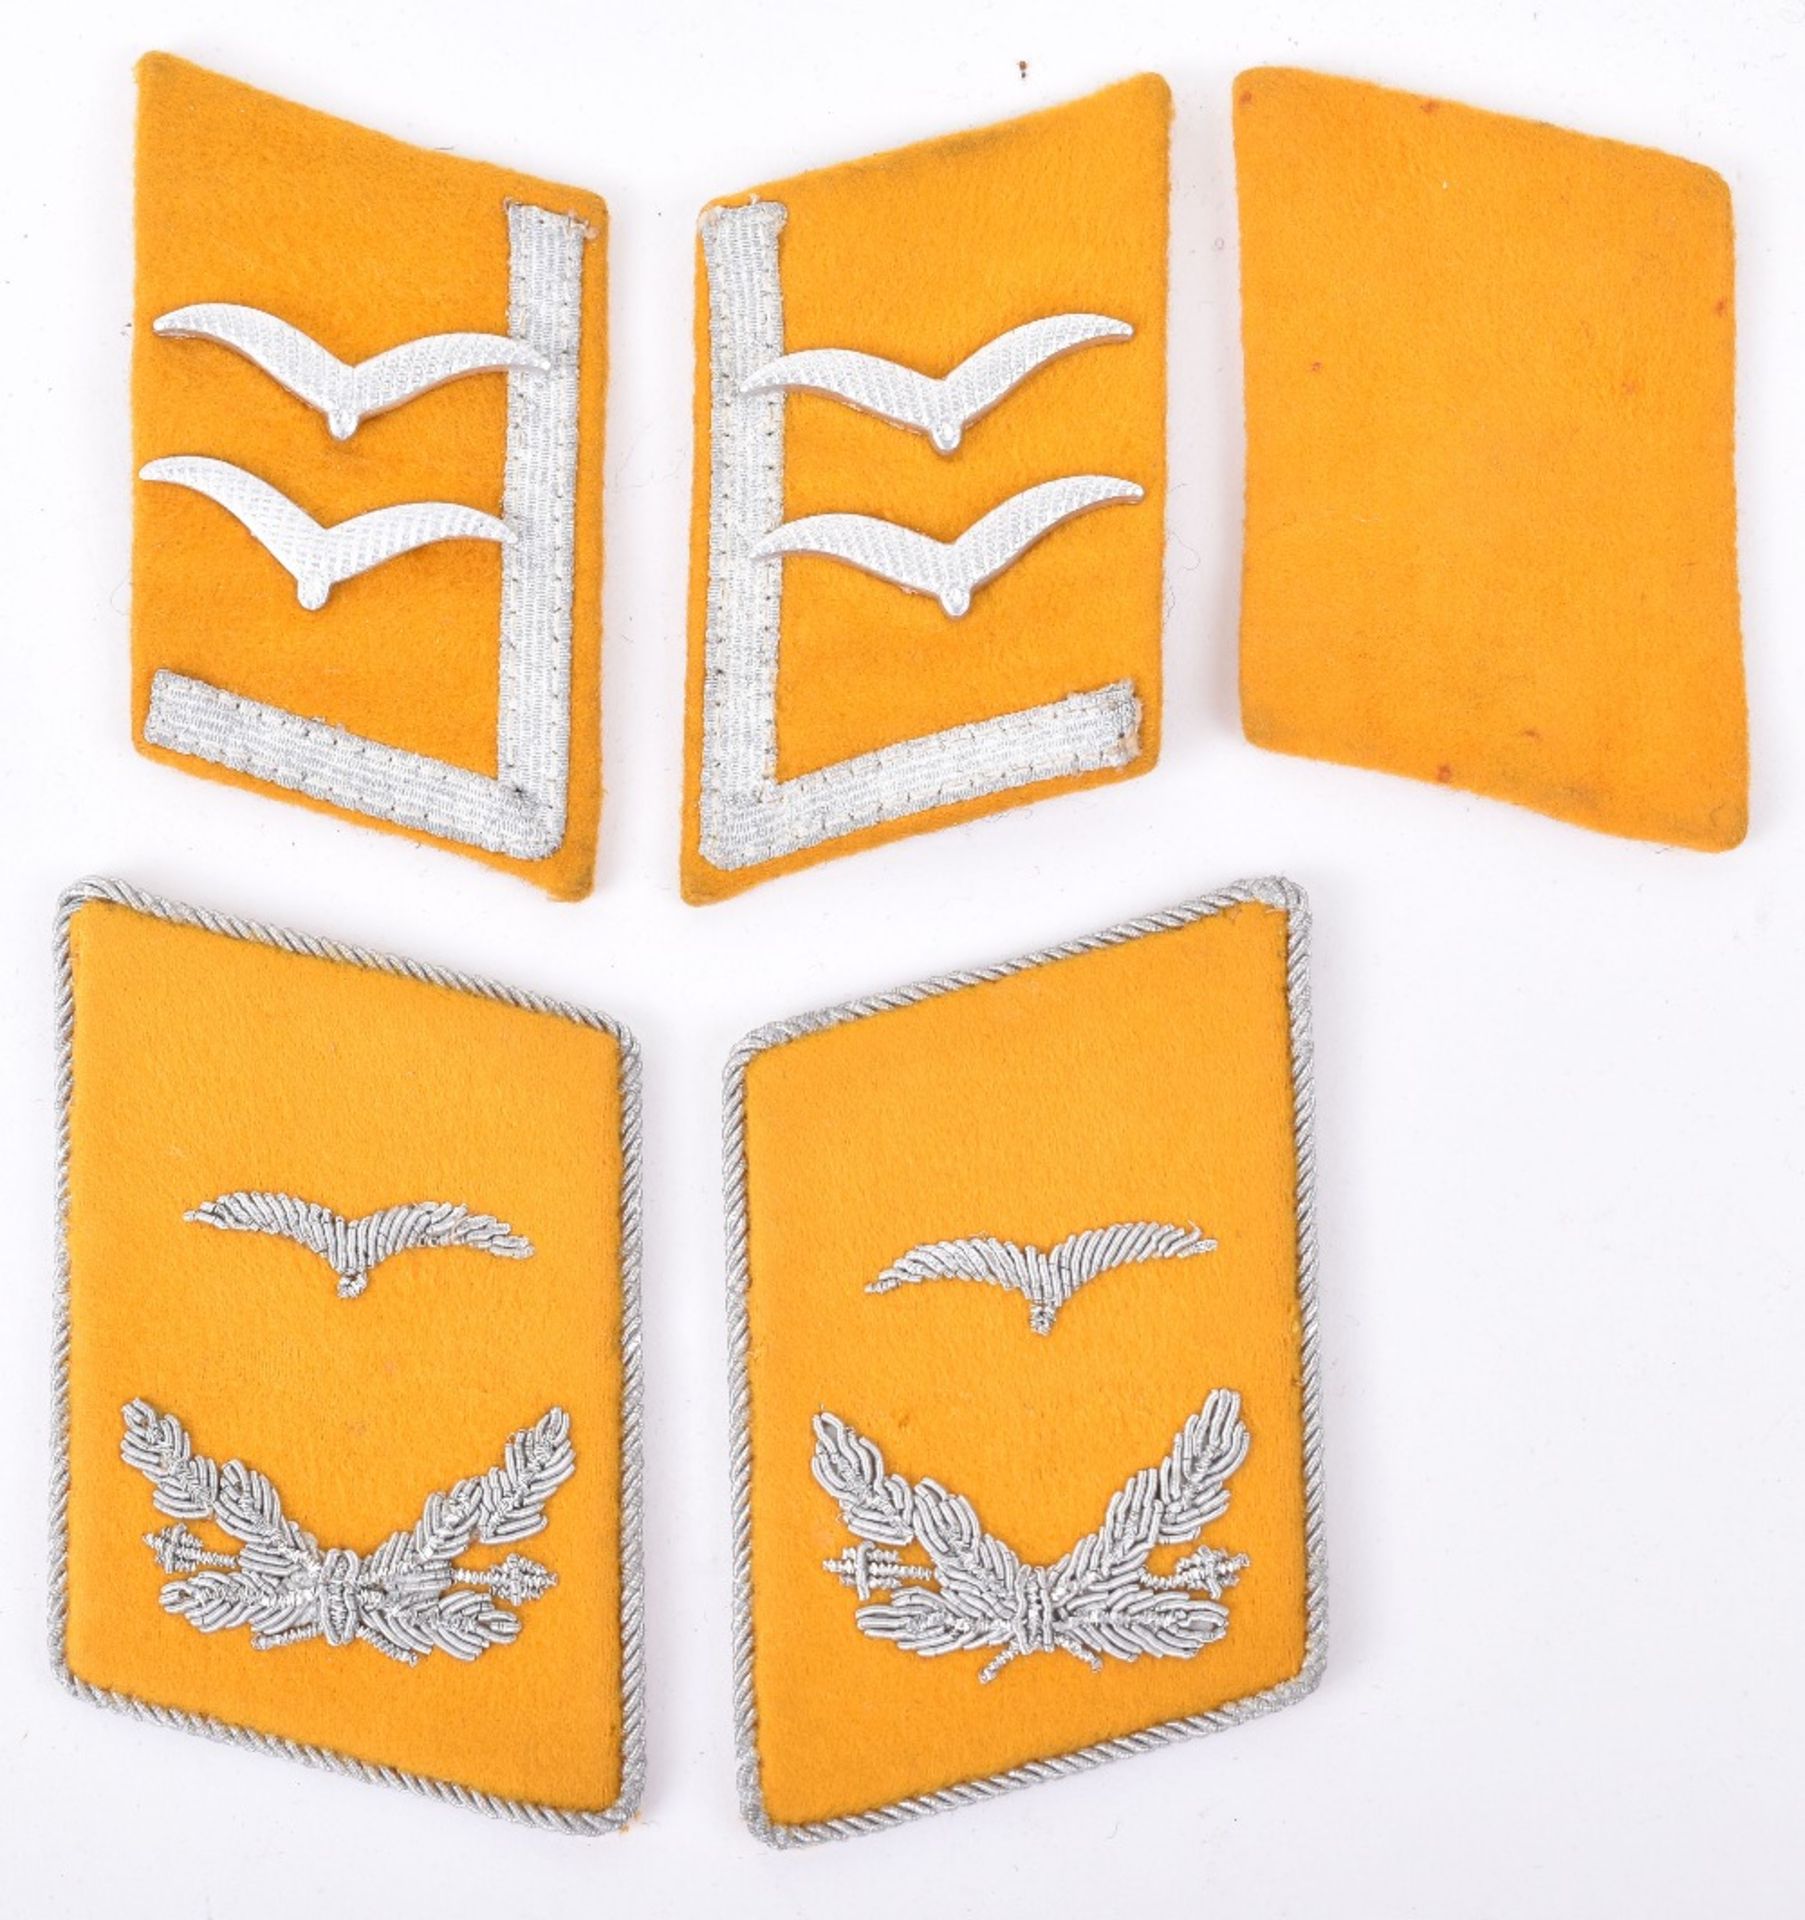 2x Pairs of Luftwaffe Flight Section / Fallschirmjager Tunic Collar Patches